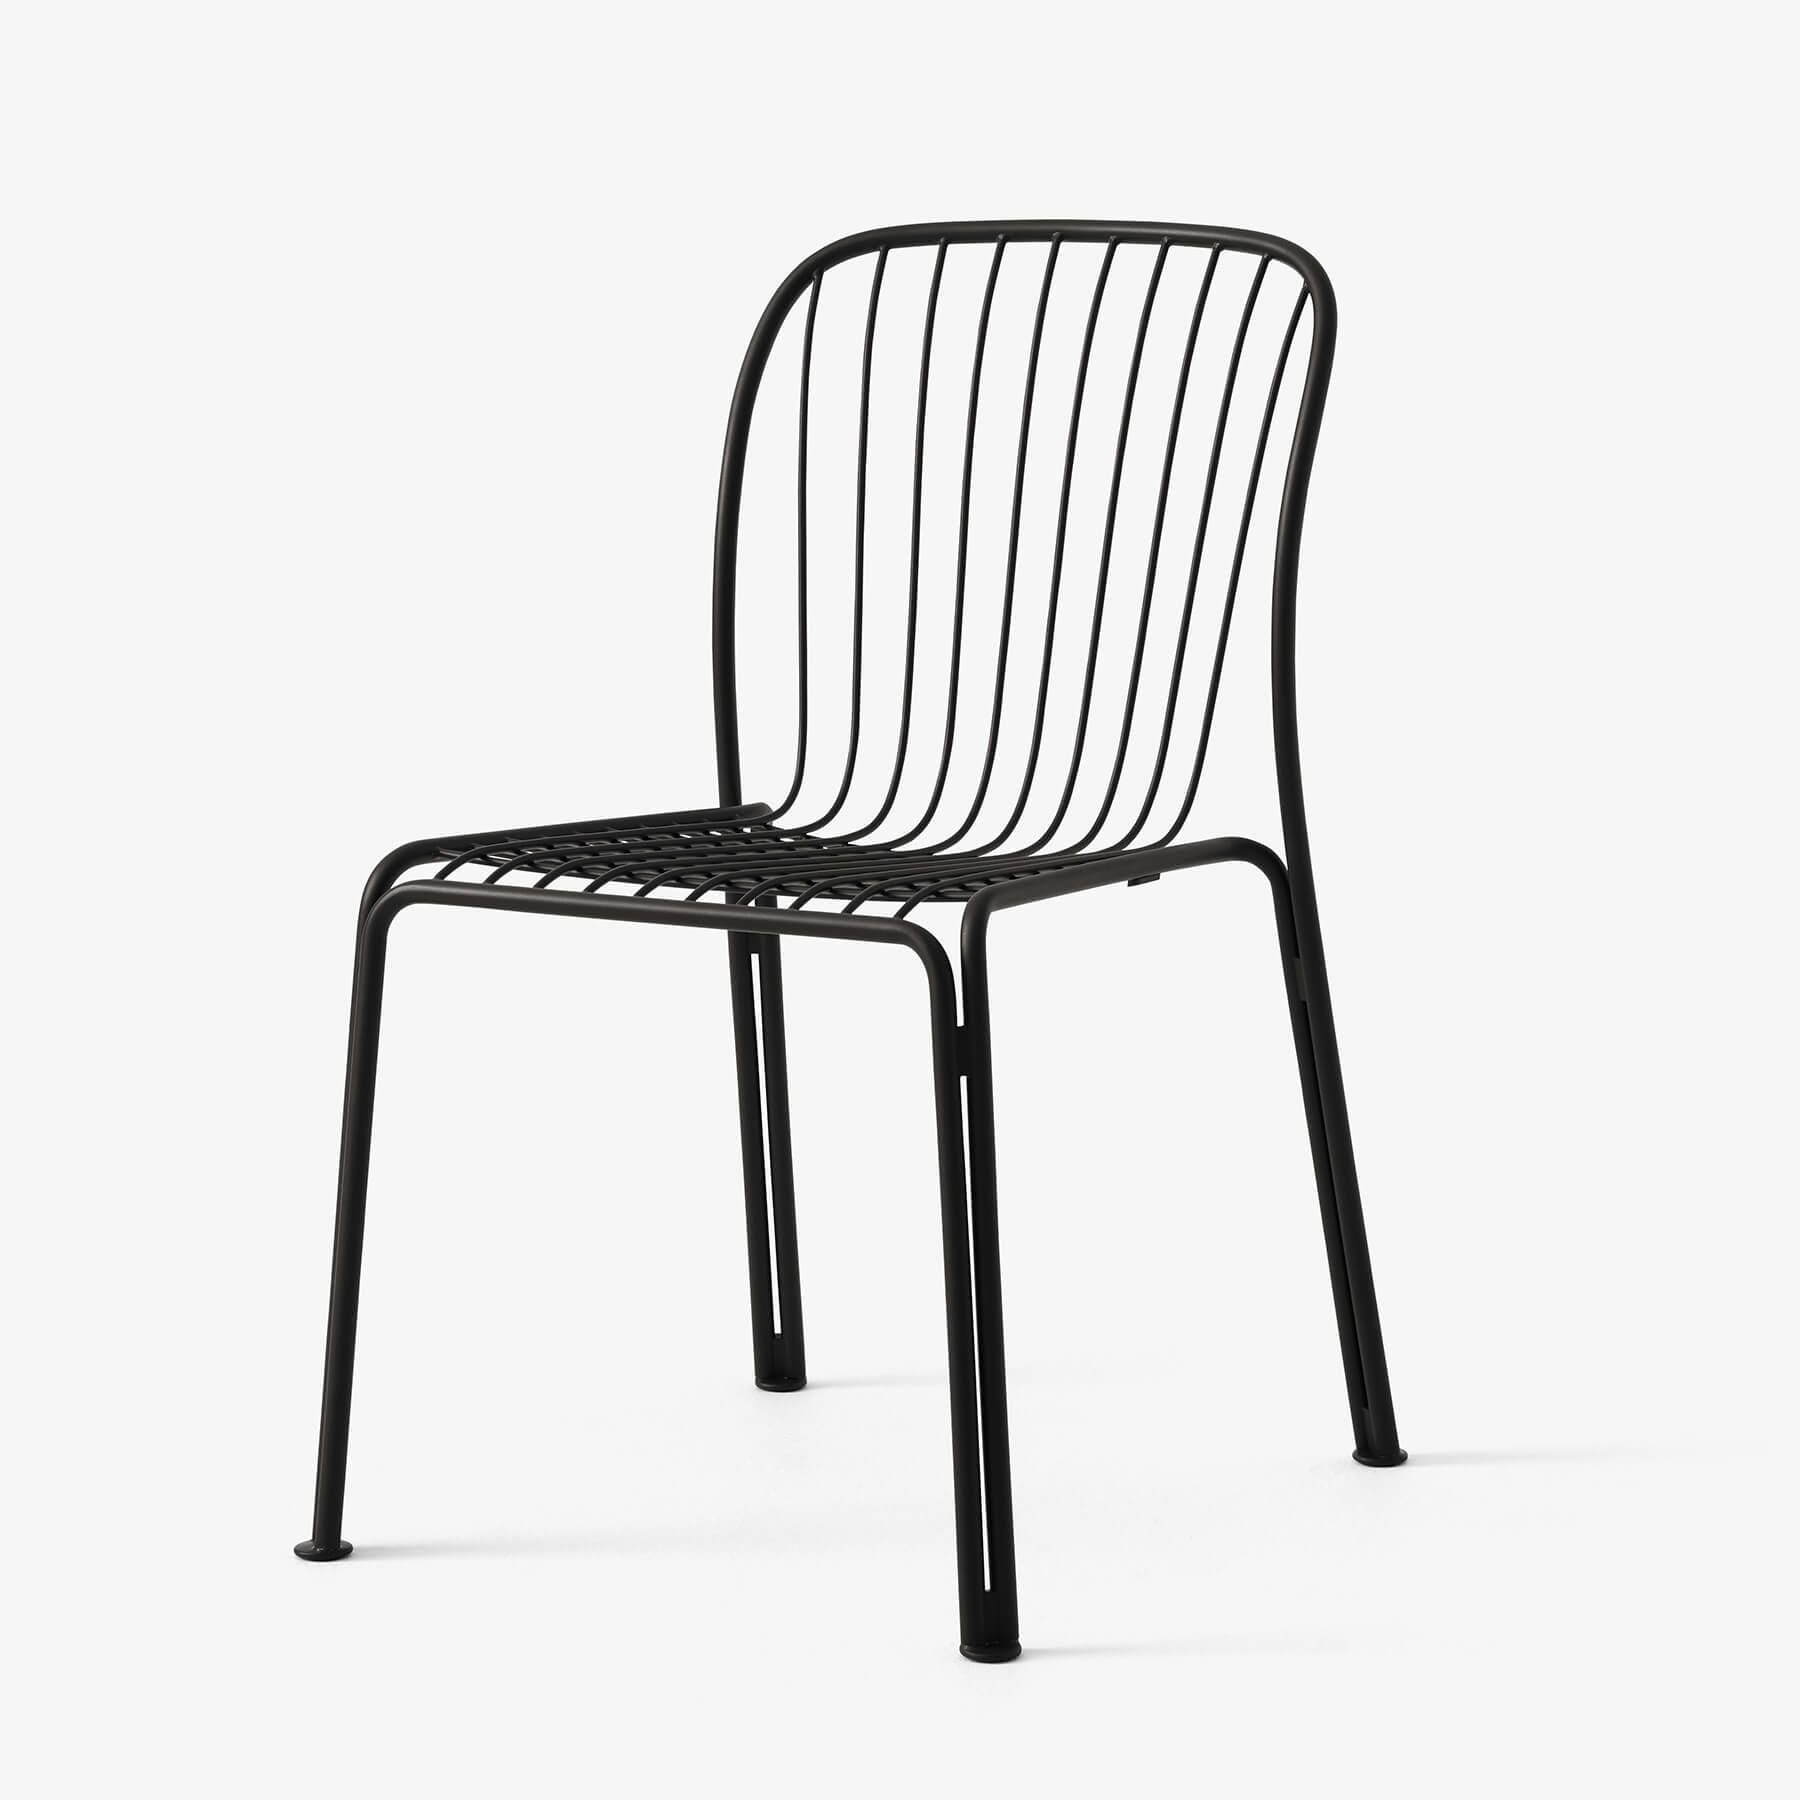 Tradition Thorvald Sc94 Outdoor Chair Warm Black